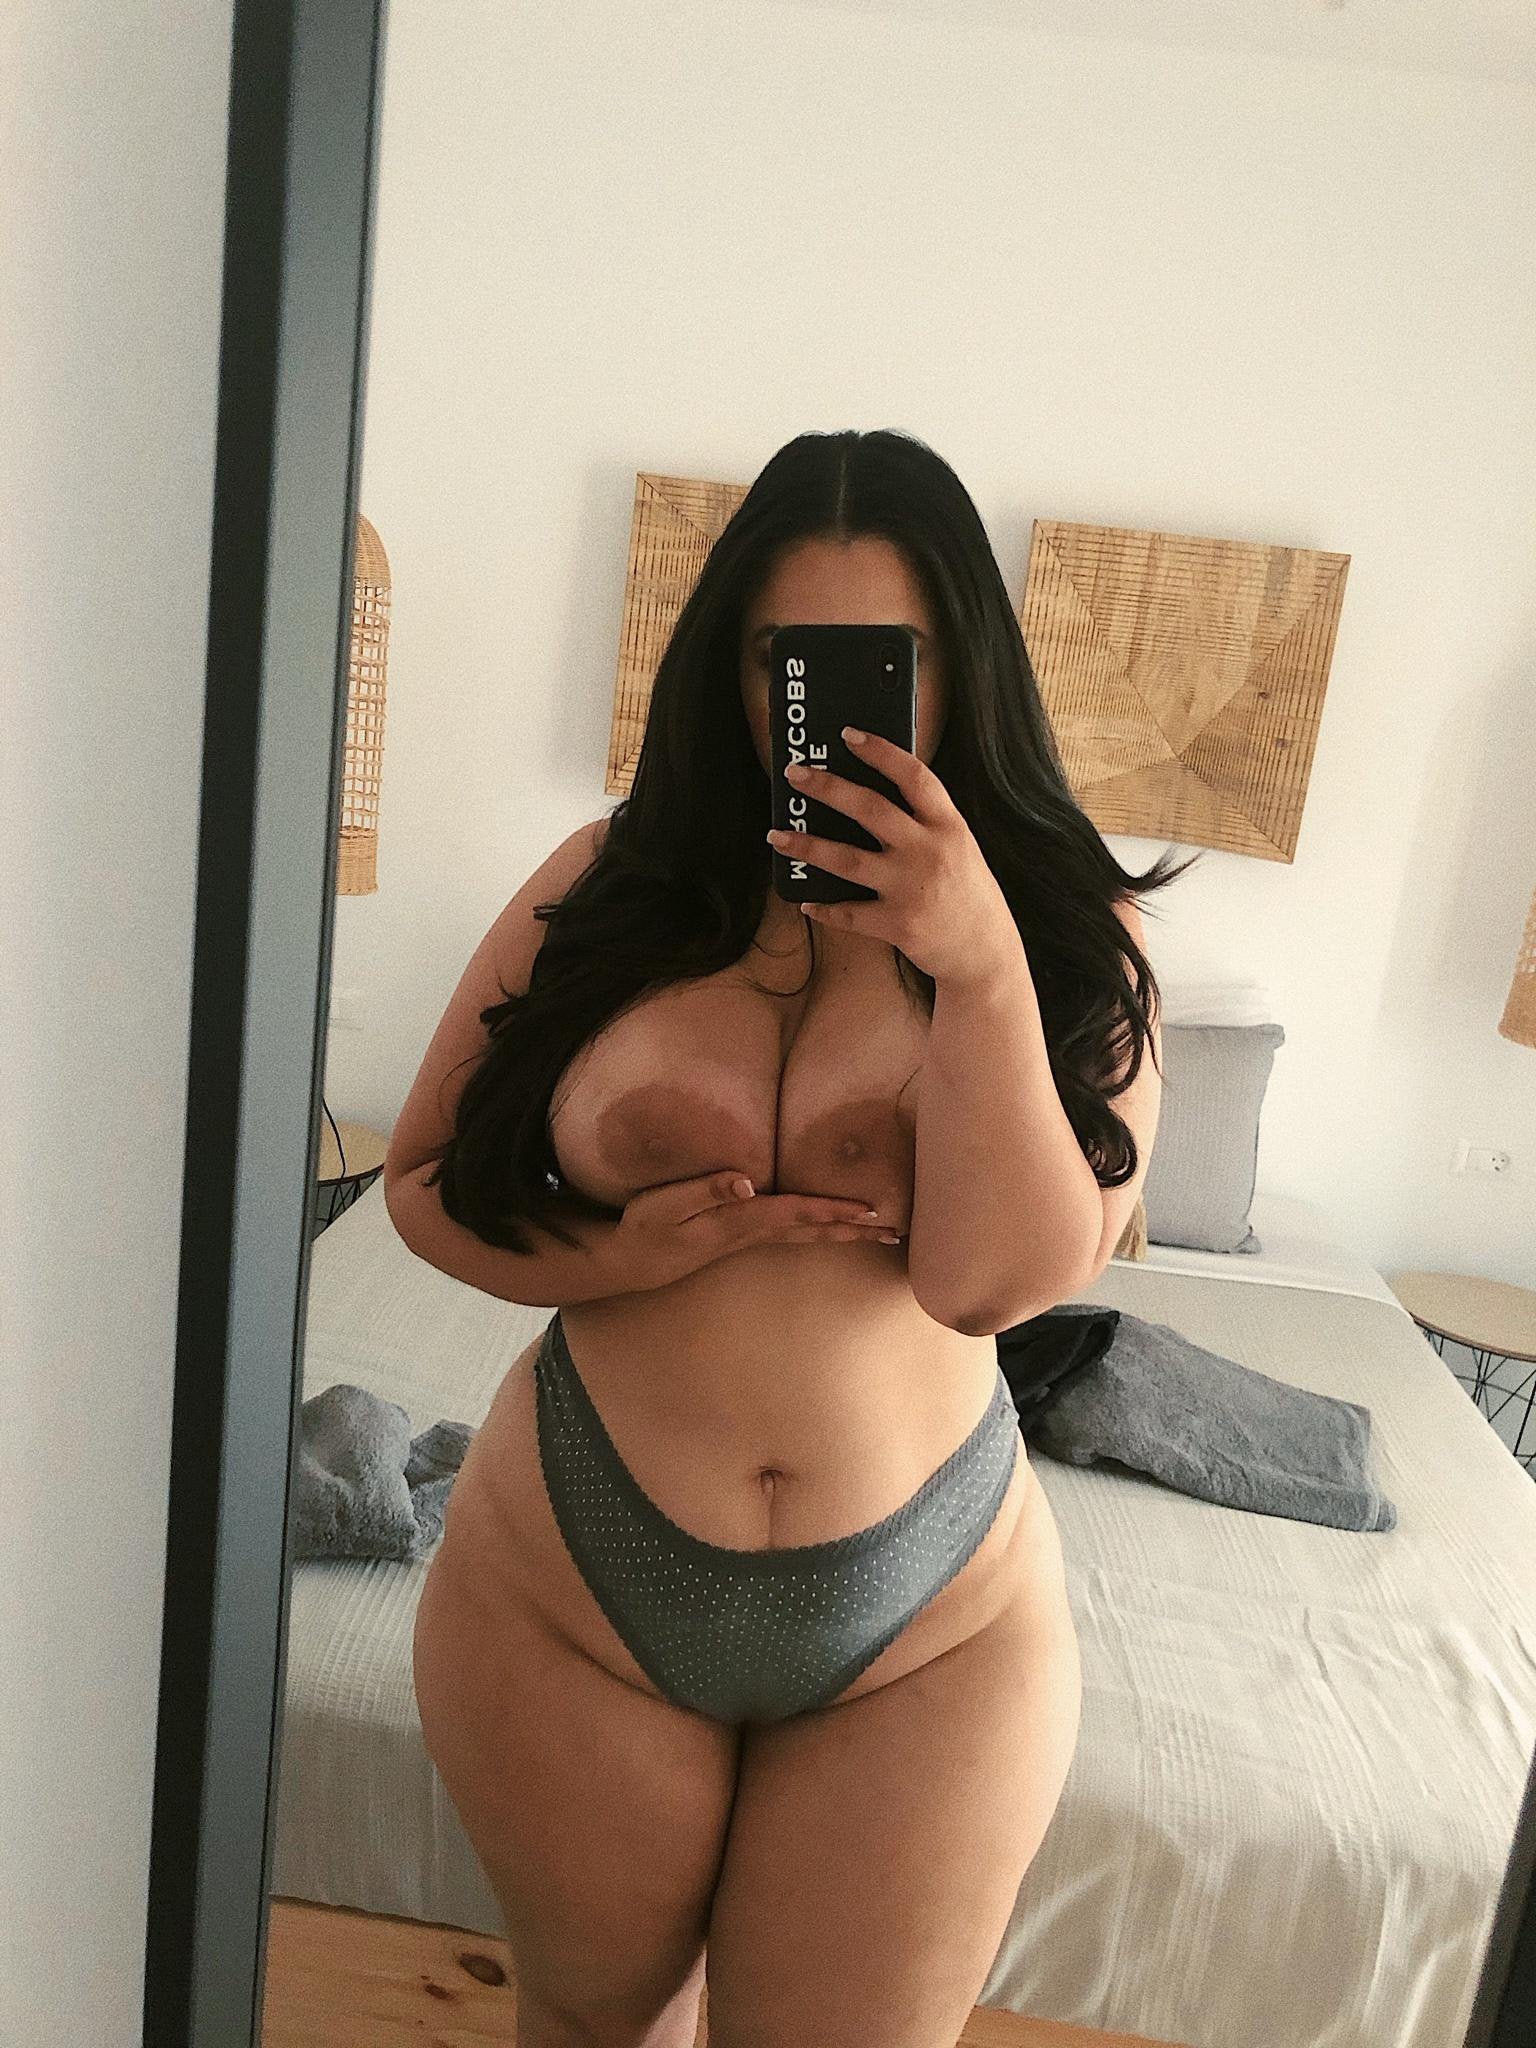 Ever fucked a thick girl like me